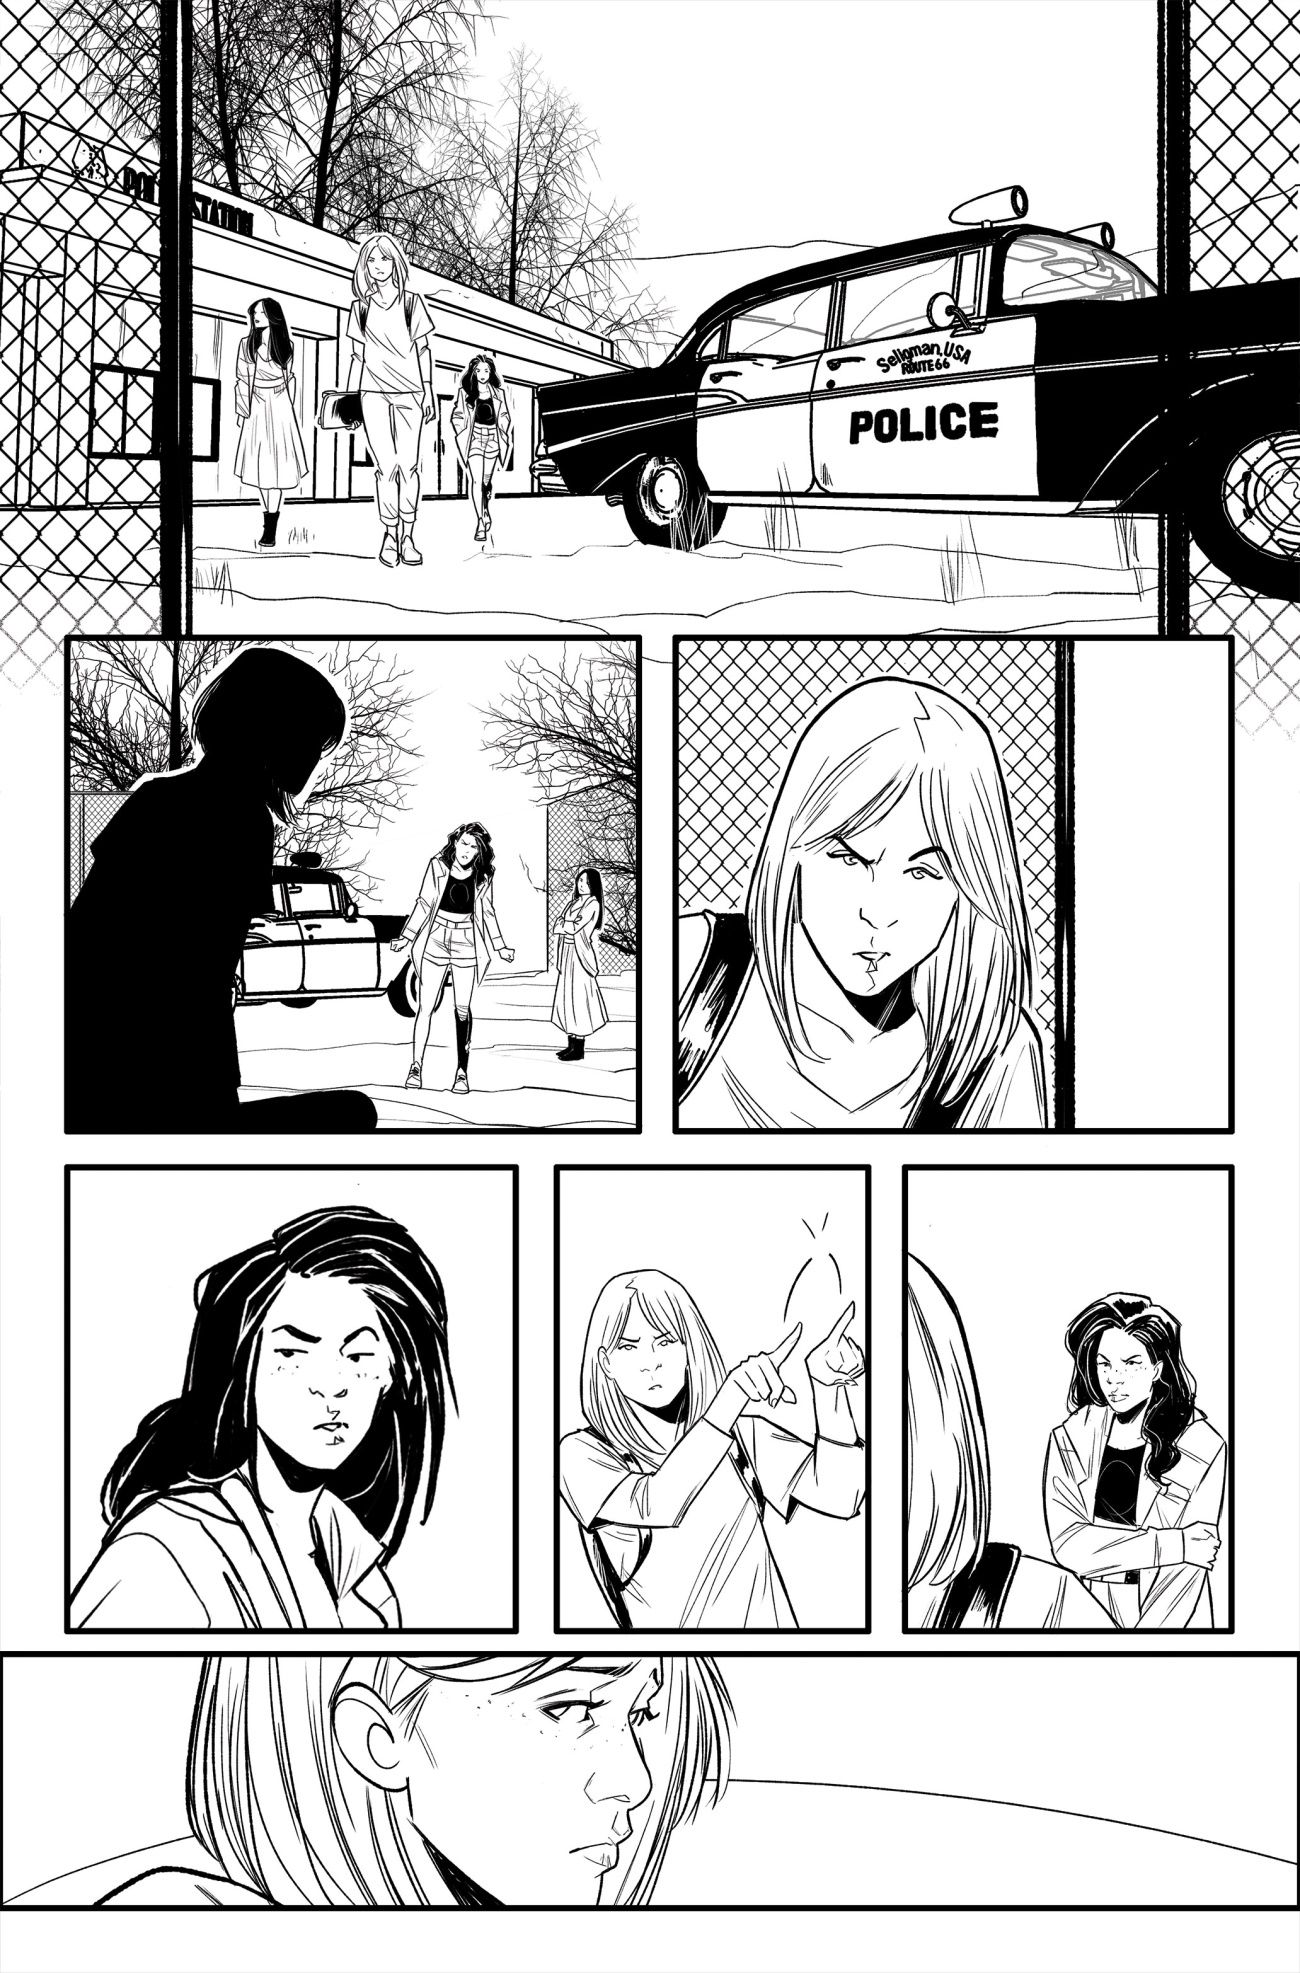 Jill and the Killers #1 from Oni Press, black & white preview page